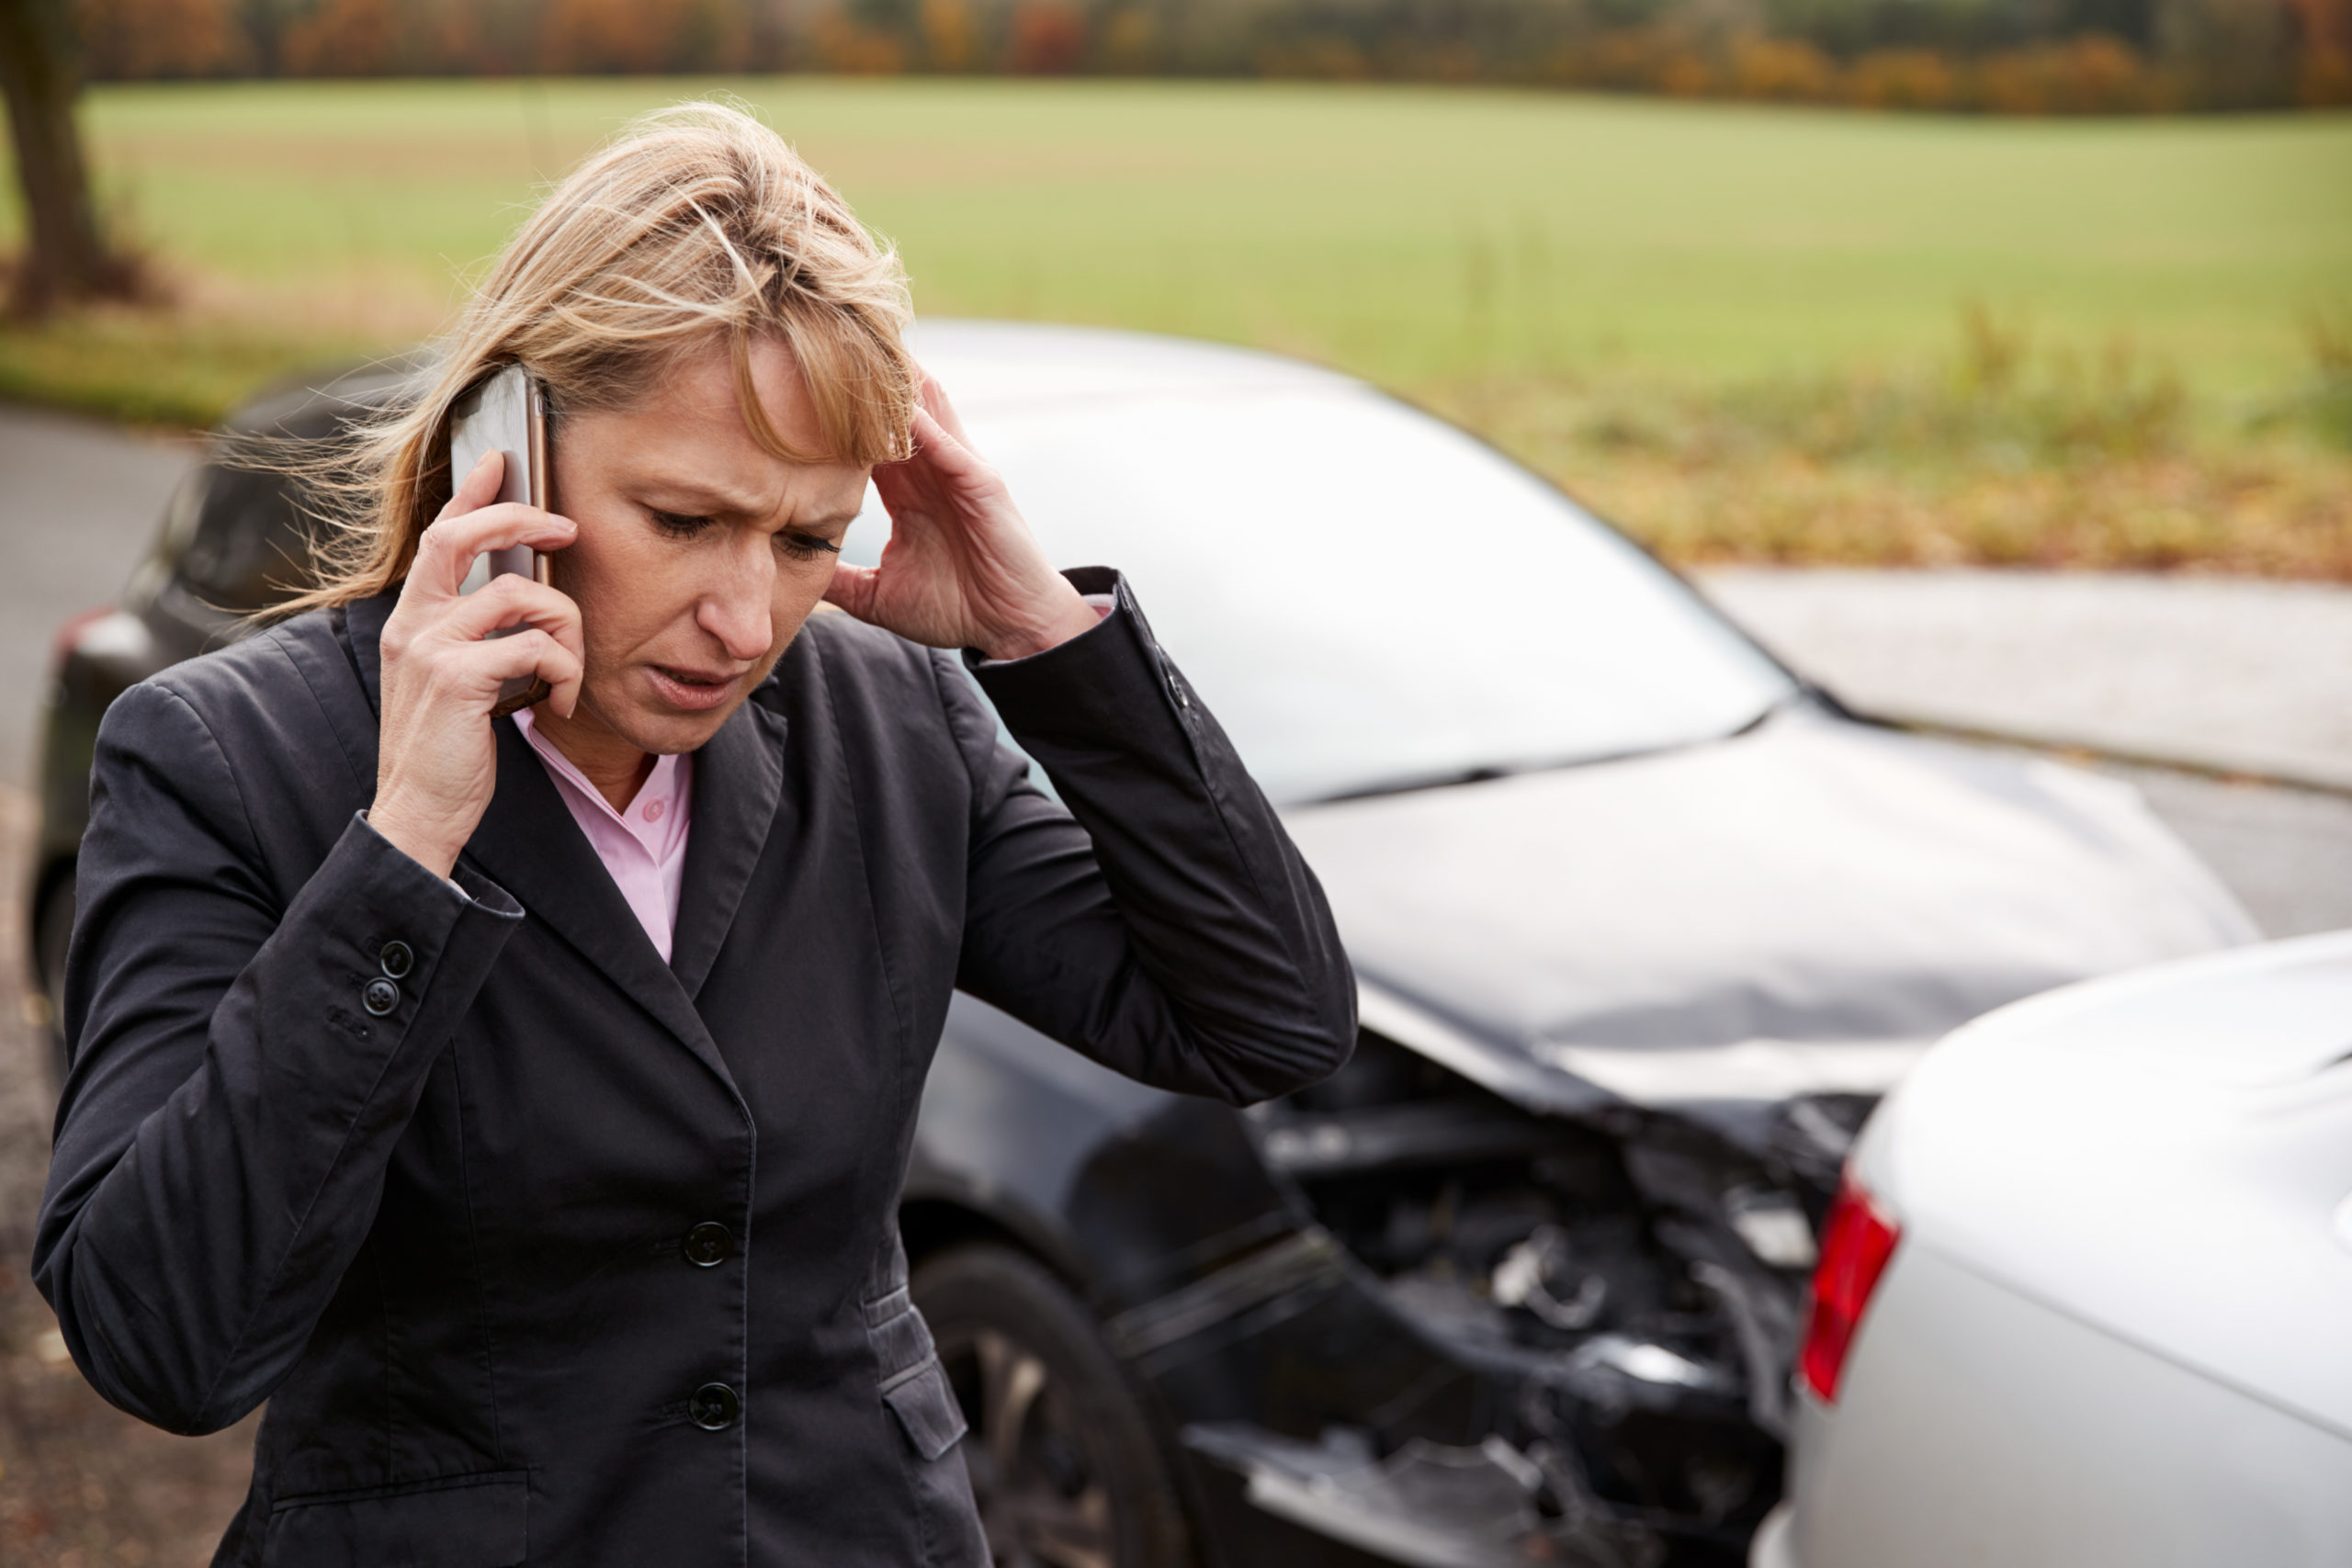 How to Determine Fault in a Florida Car Accident